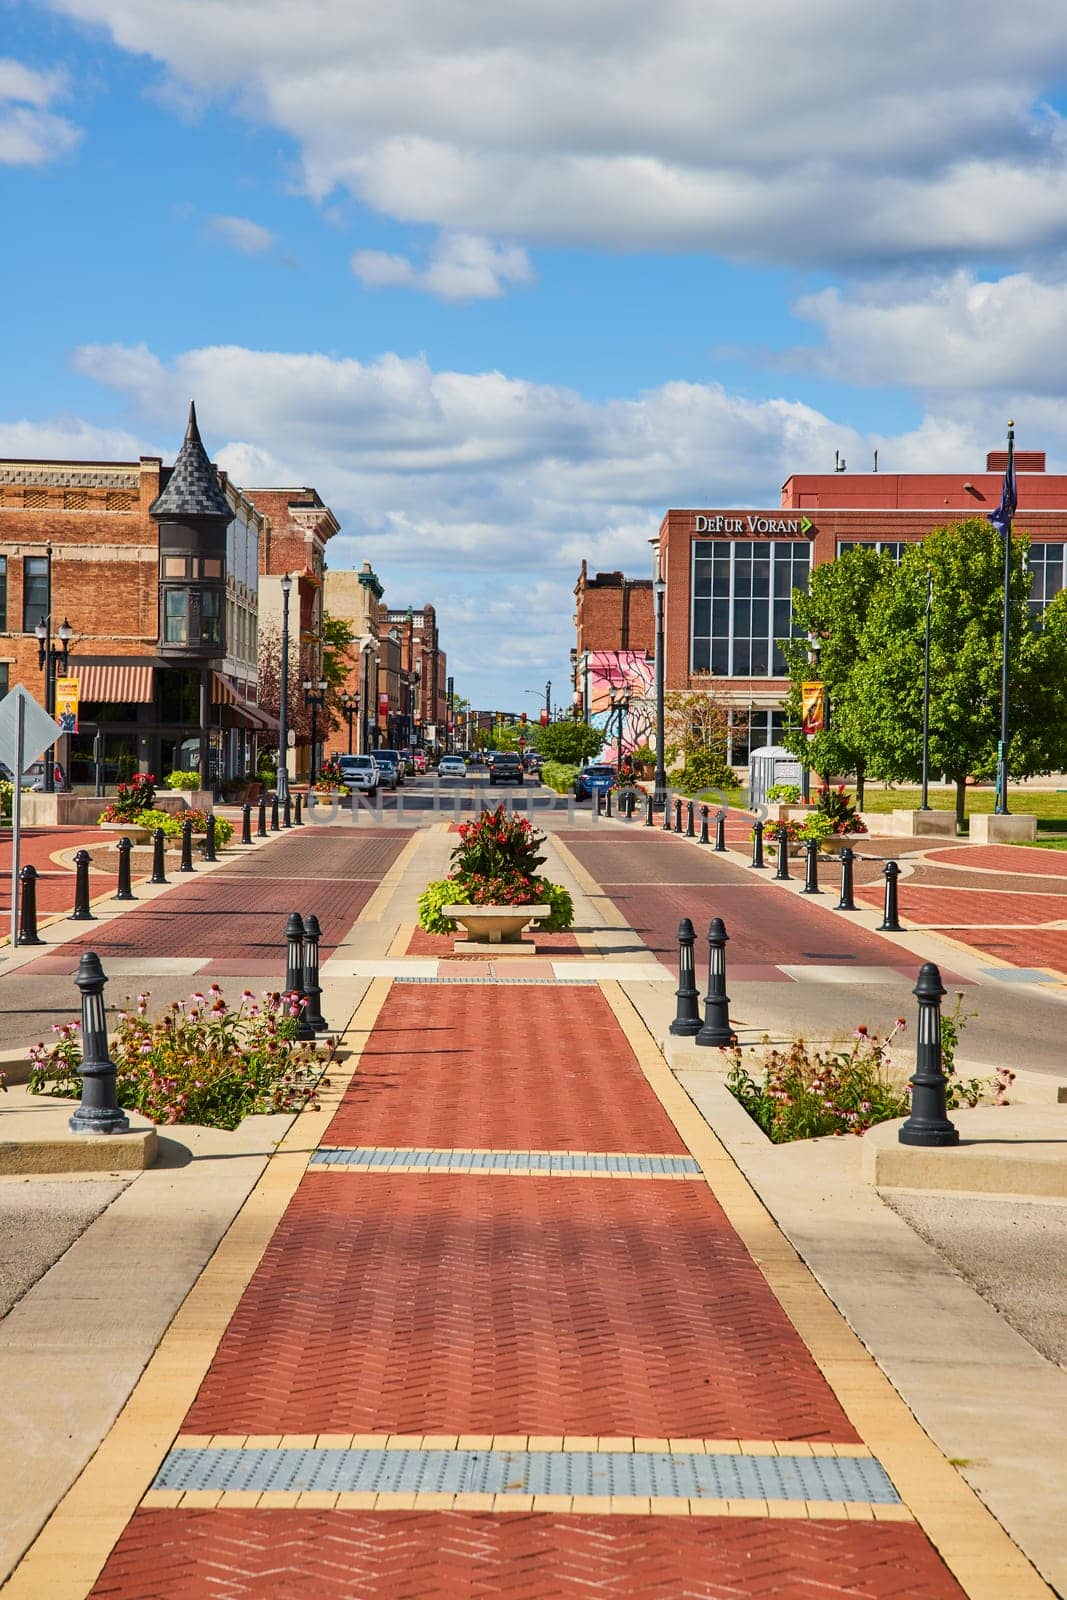 Daytime view of historic brick buildings, modern business, and pedestrian pathway in downtown Muncie, Indiana, showcasing small-town Americana in 2023.